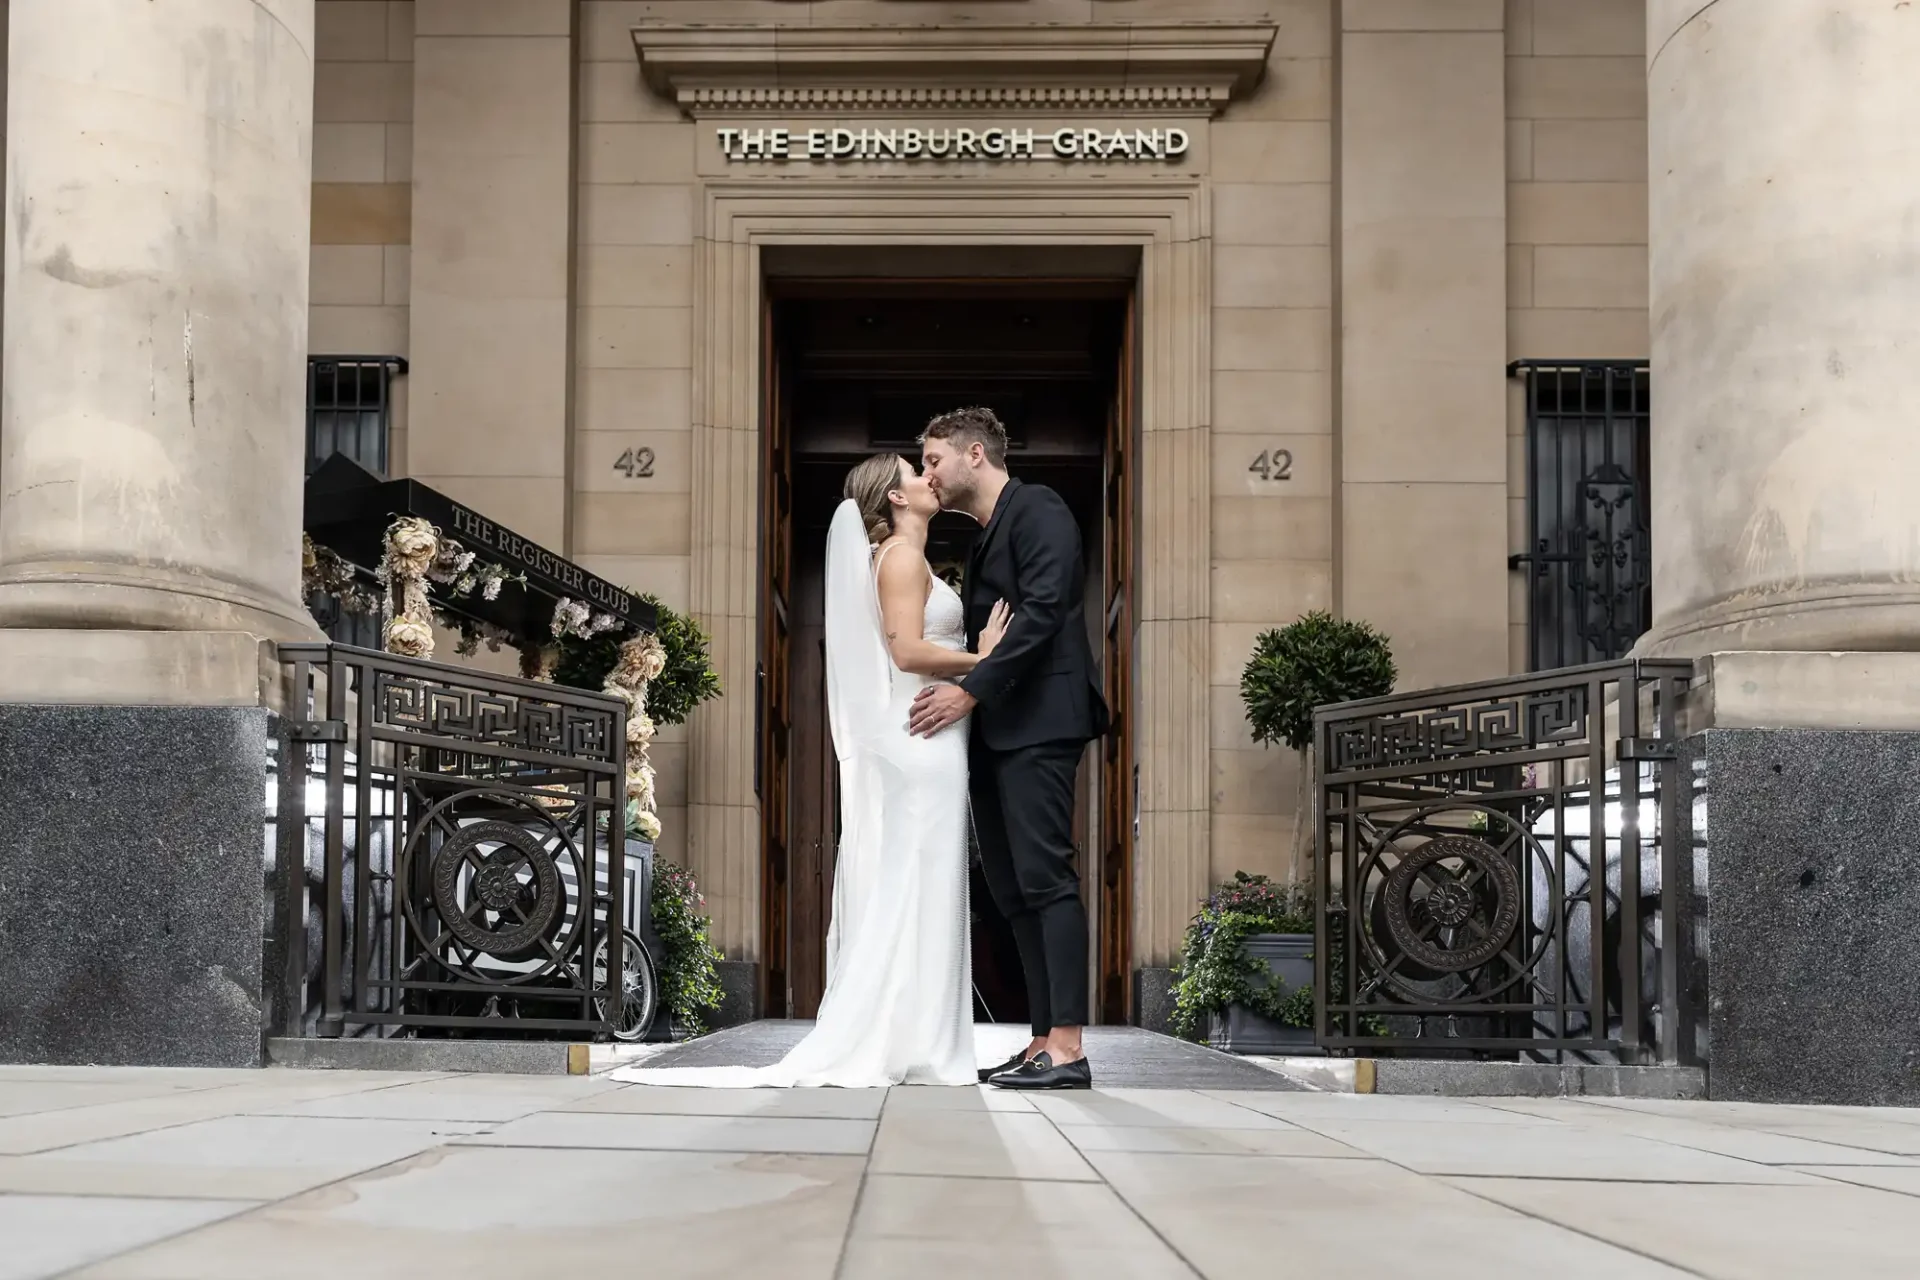 A couple kissing in front of "the edinburgh grand" entrance, framed by ornate black gates on a paved street.